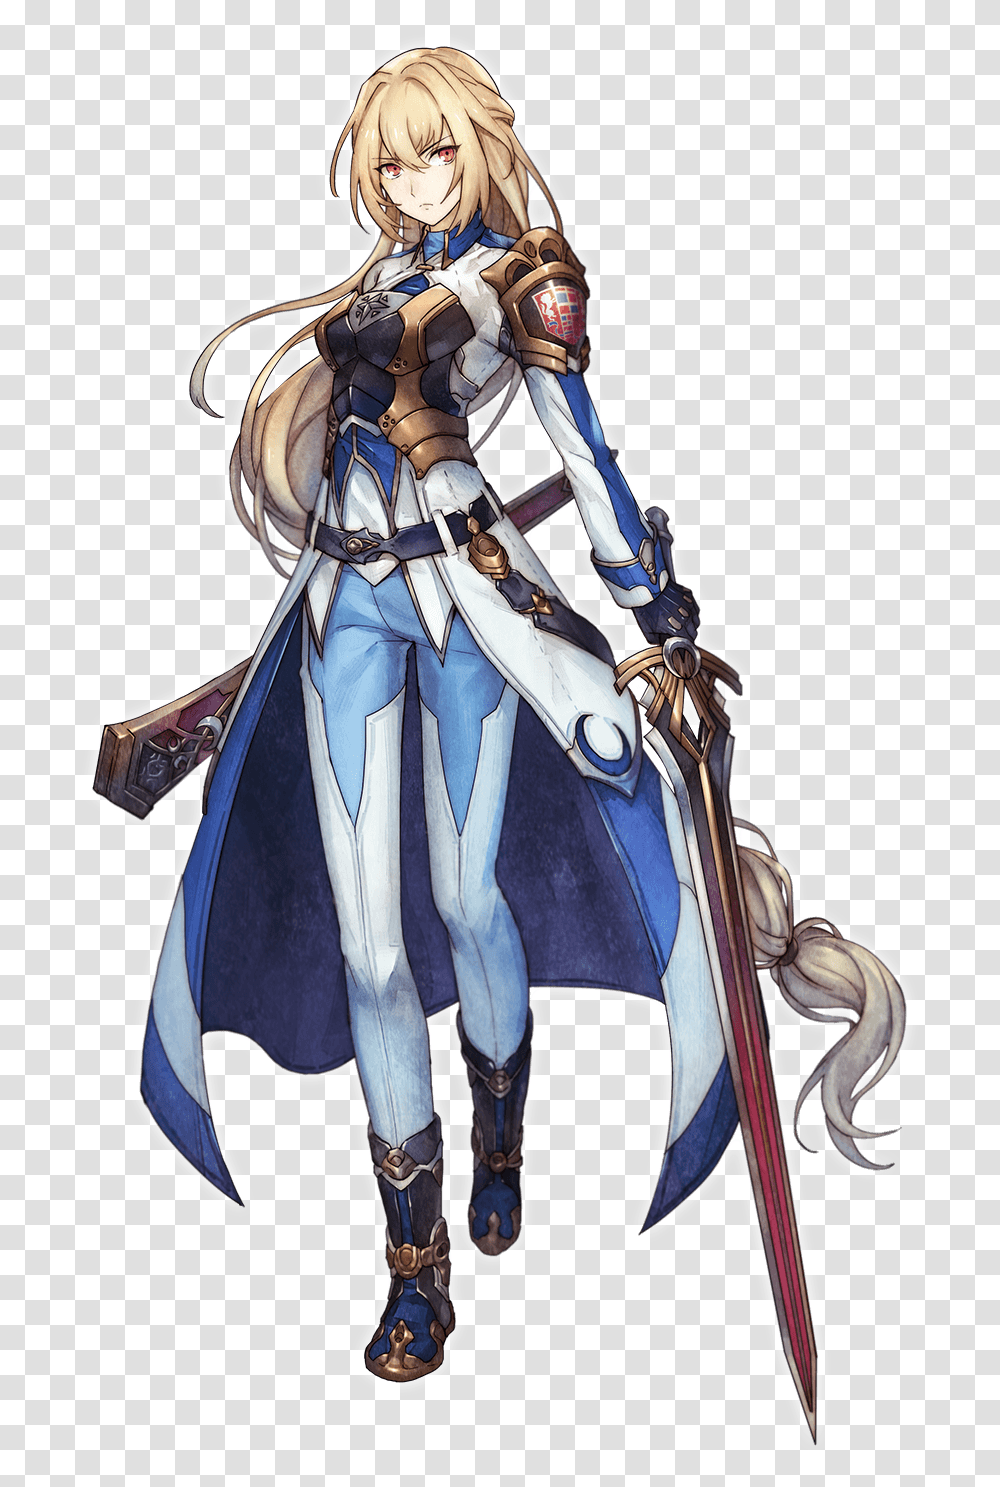 Library Of Warrior Woman Aesthetic Breastplate Royalty Warrior Anime Girl Princess, Person, Human, Clothing, Apparel Transparent Png